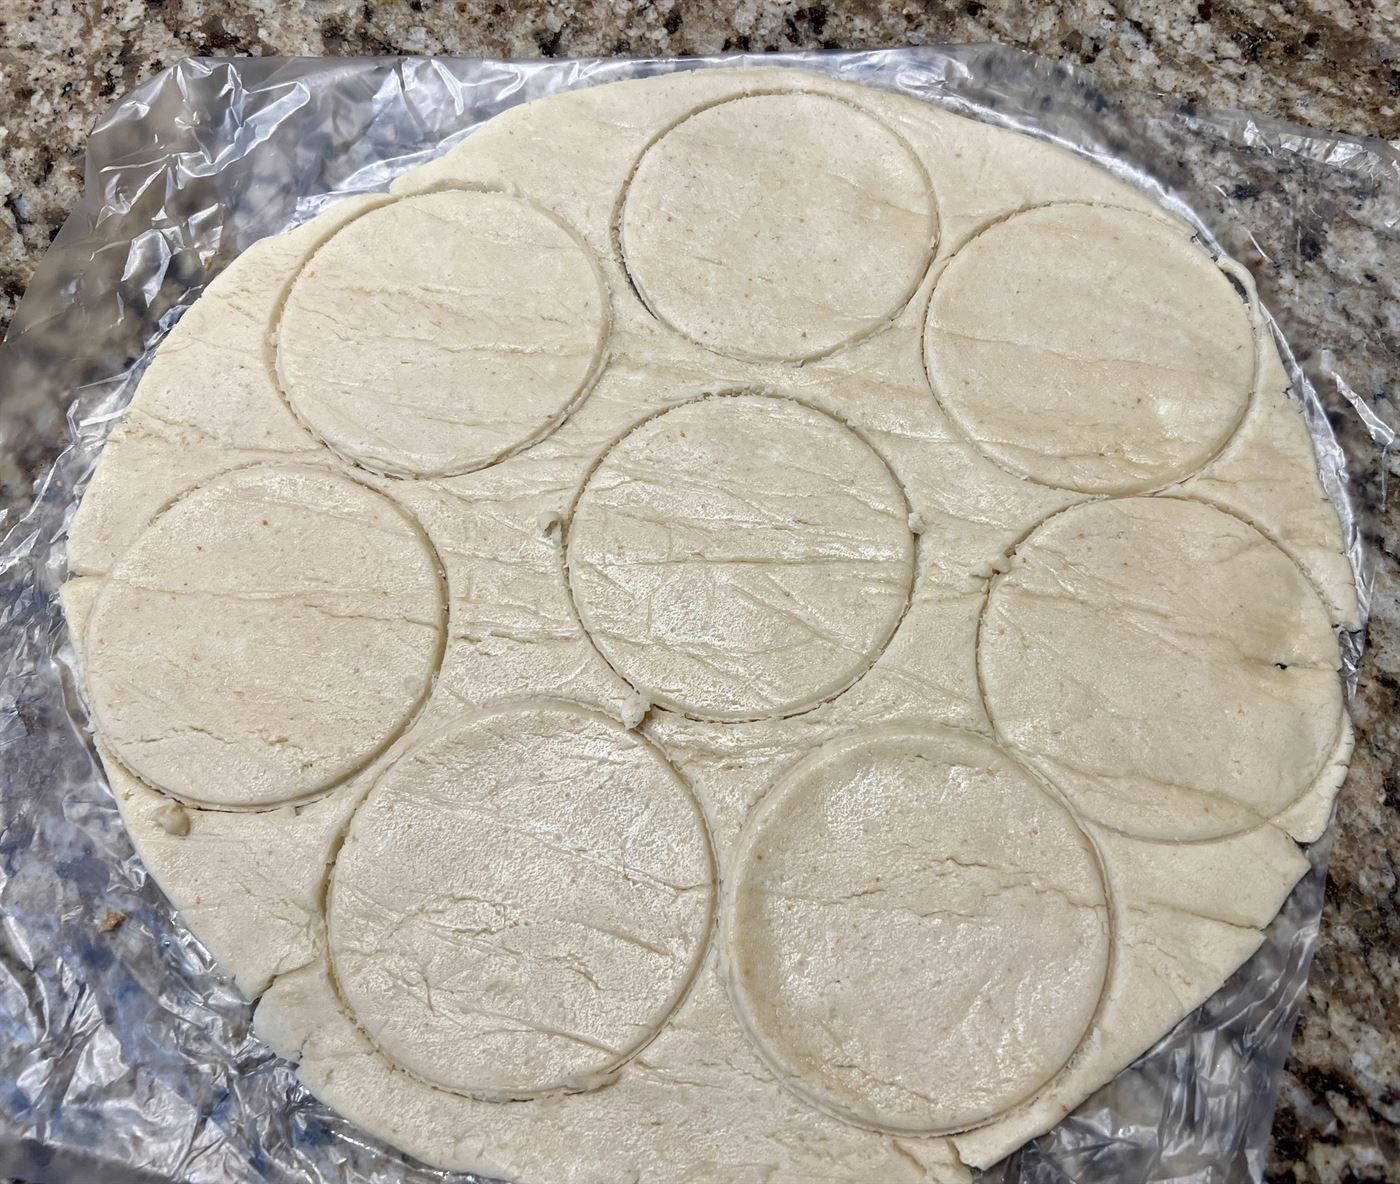 Cut out circles of pie crust using a cookie cutter. Samantha Bailey | The Montclarion